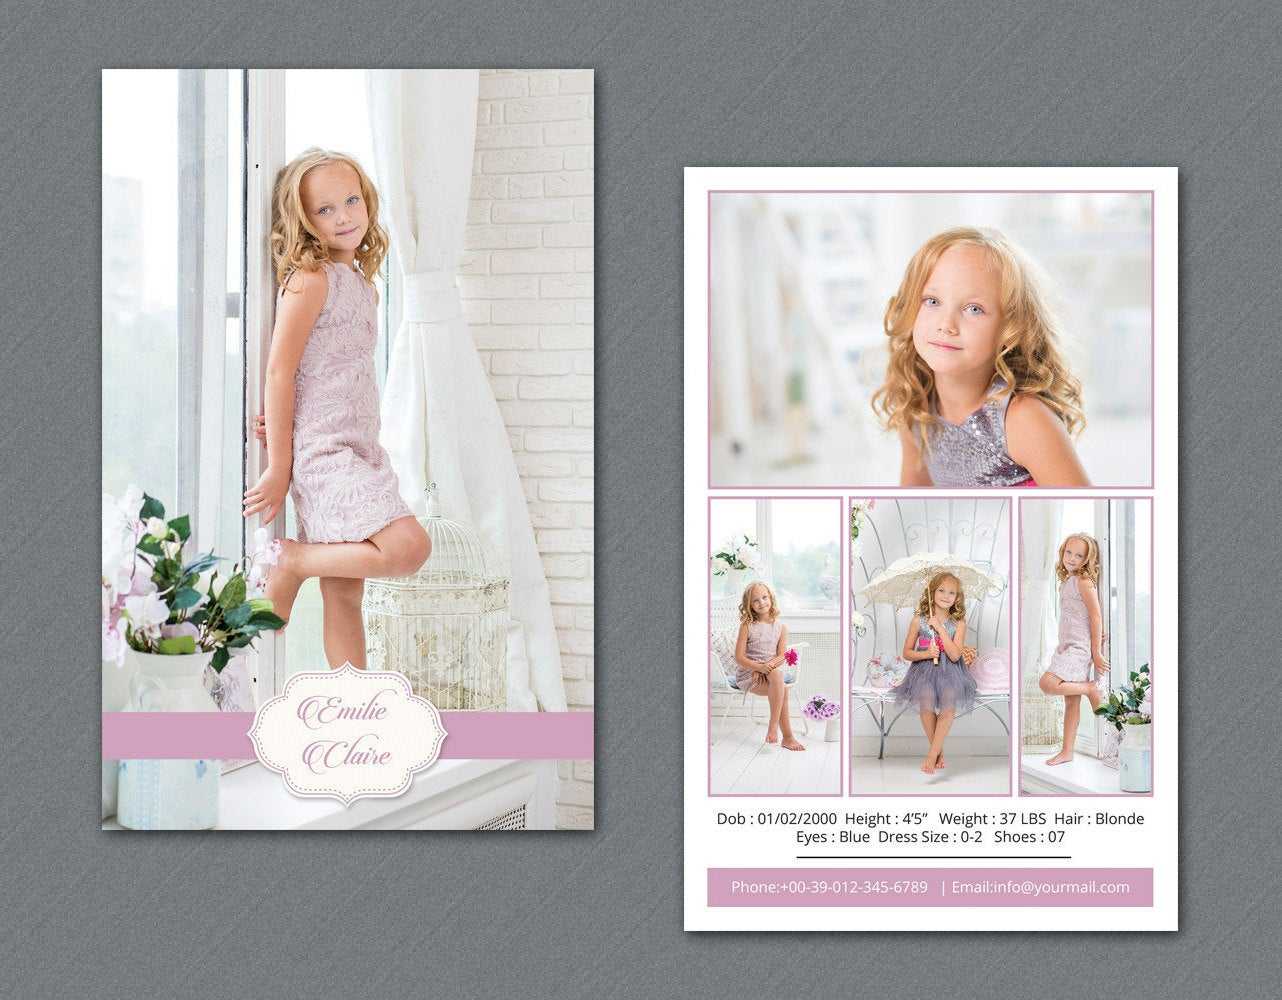 Comp Card Templates ] – On Sale Model Comp Card Photoshop Intended For Download Comp Card Template